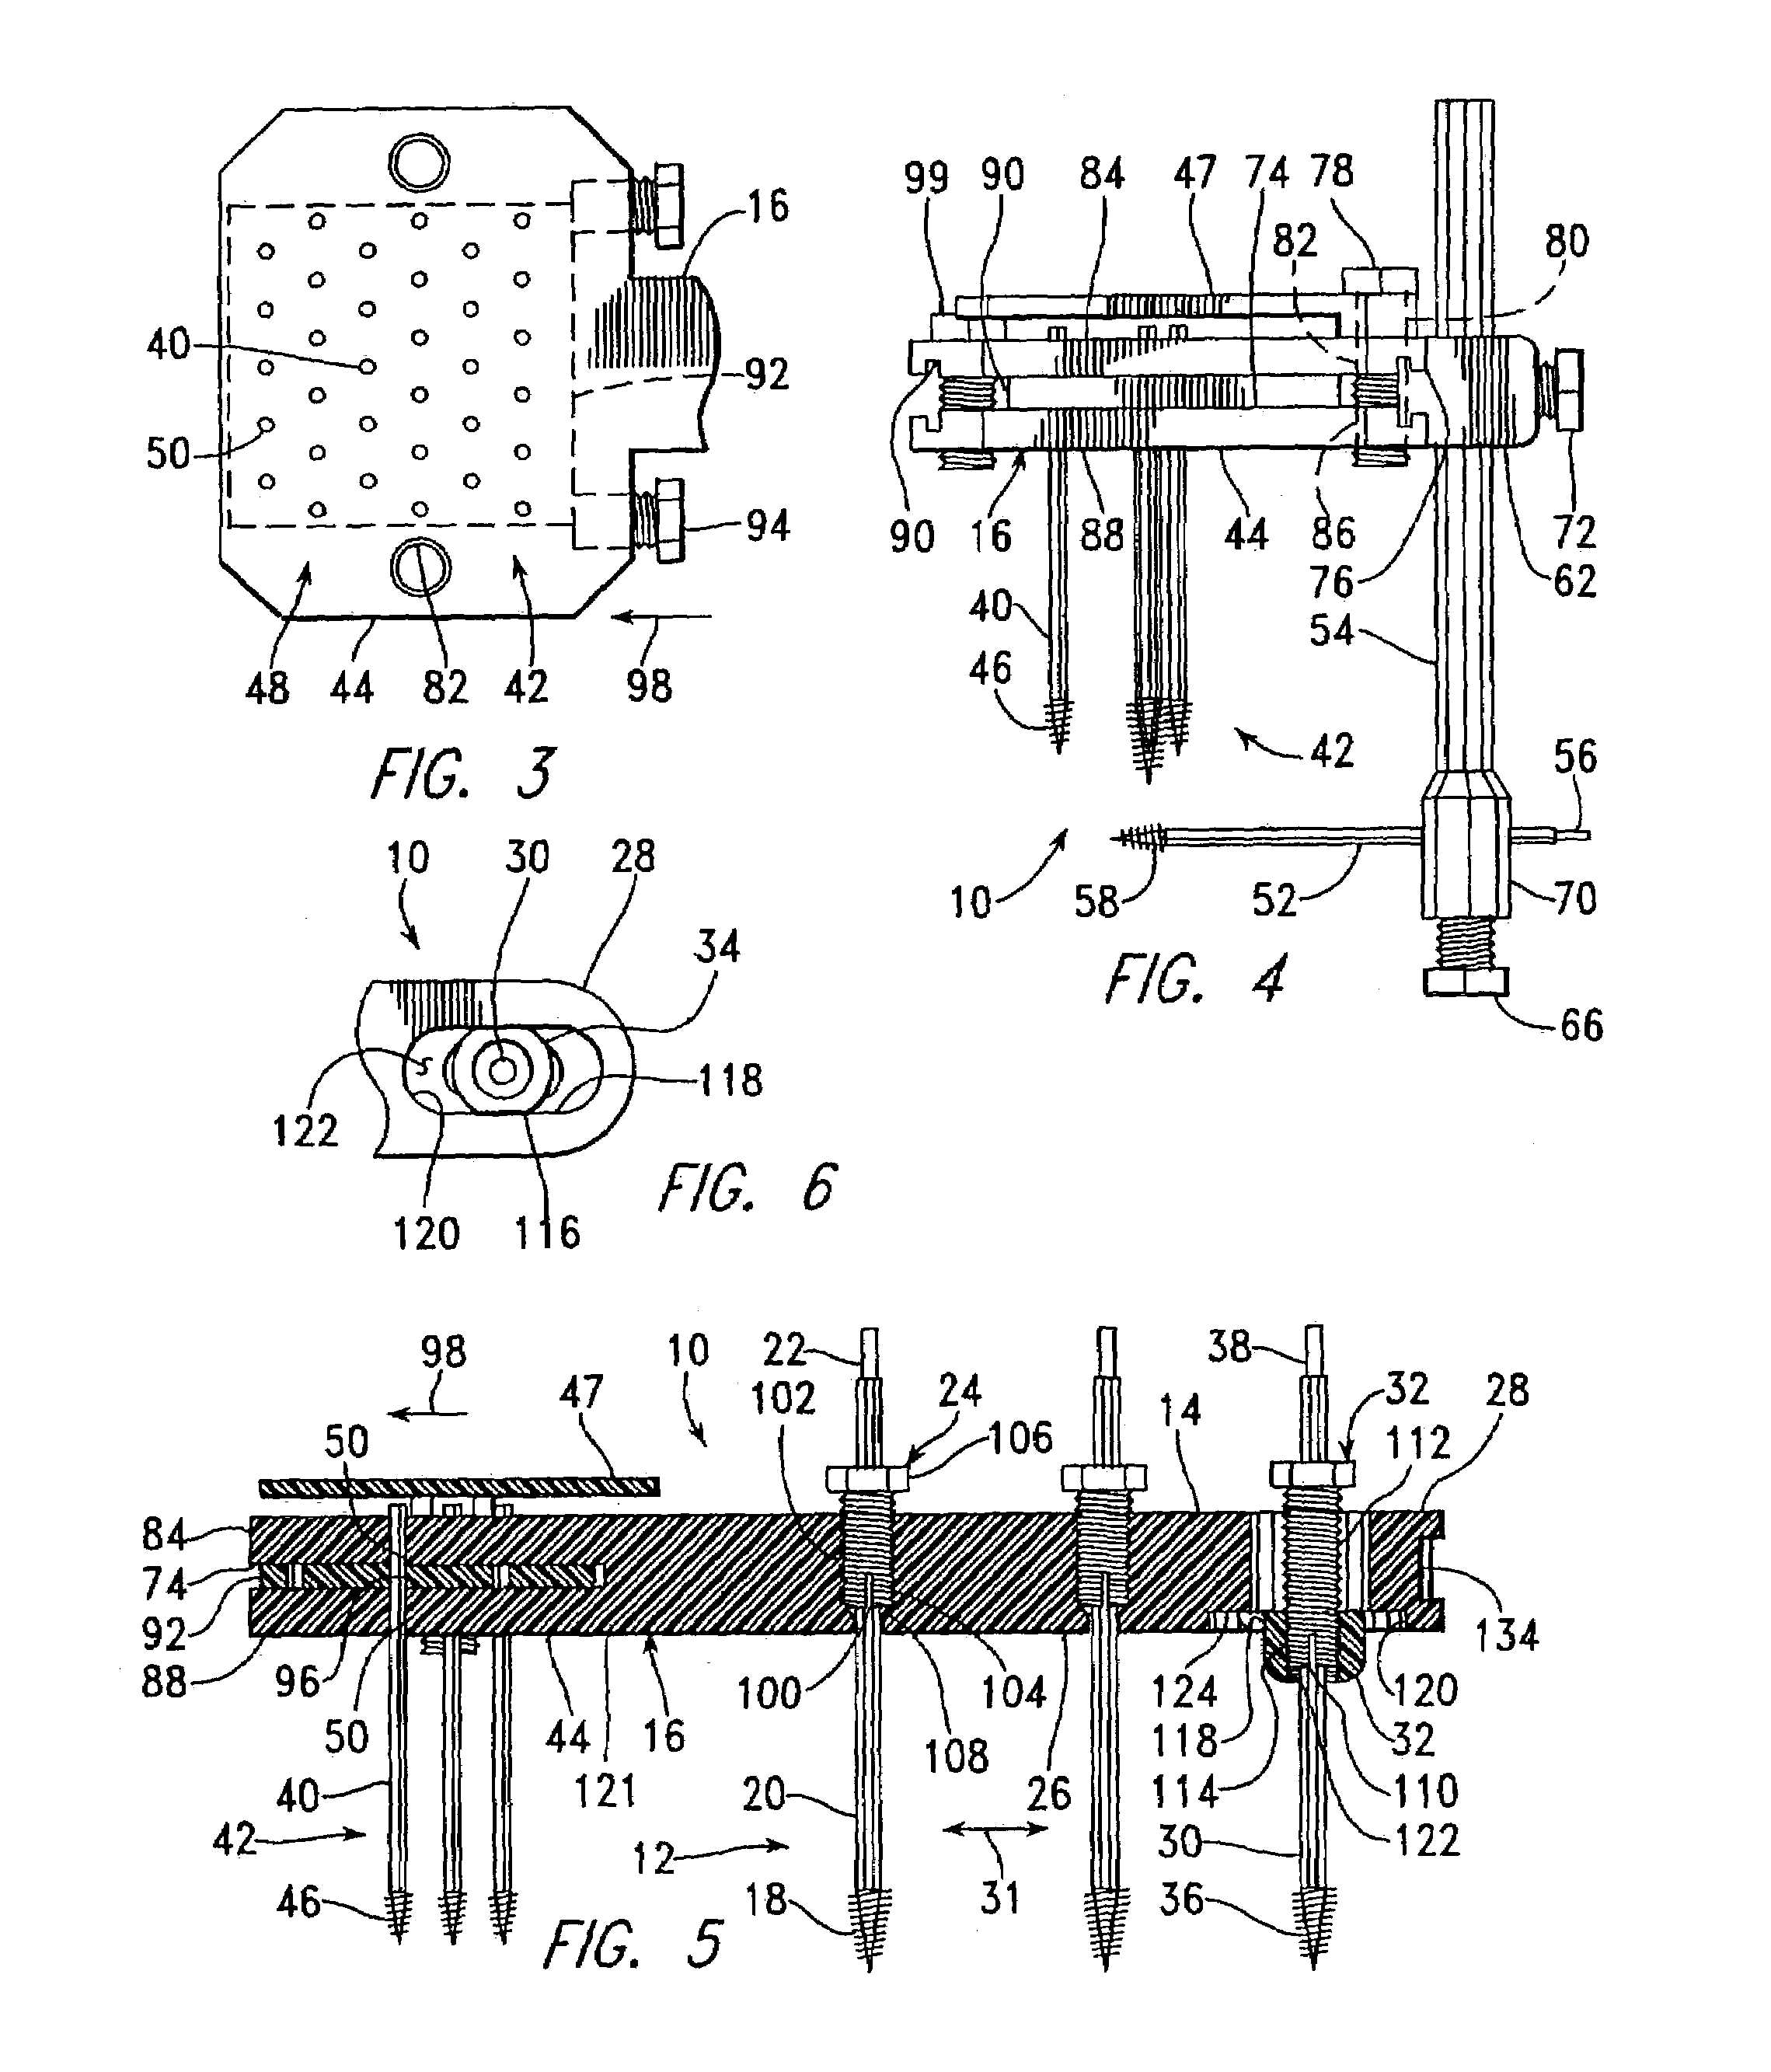 Device for external fixation of bone fractures with clamping of multiple pins and with a fixture for applying extension to bone fragments